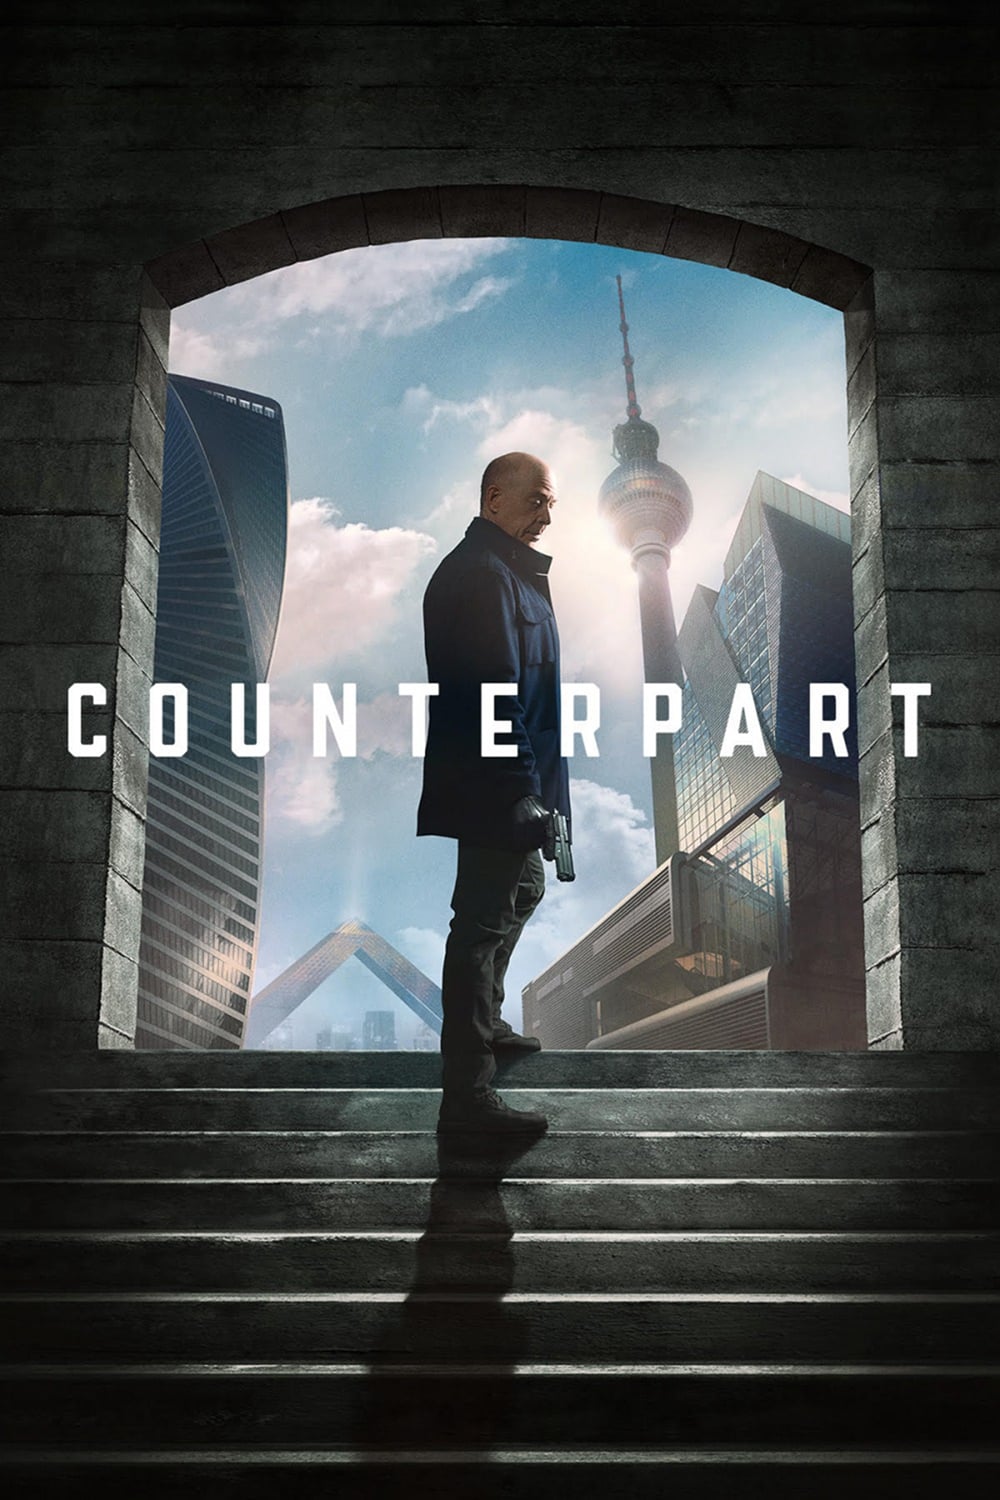 Counterpart rating